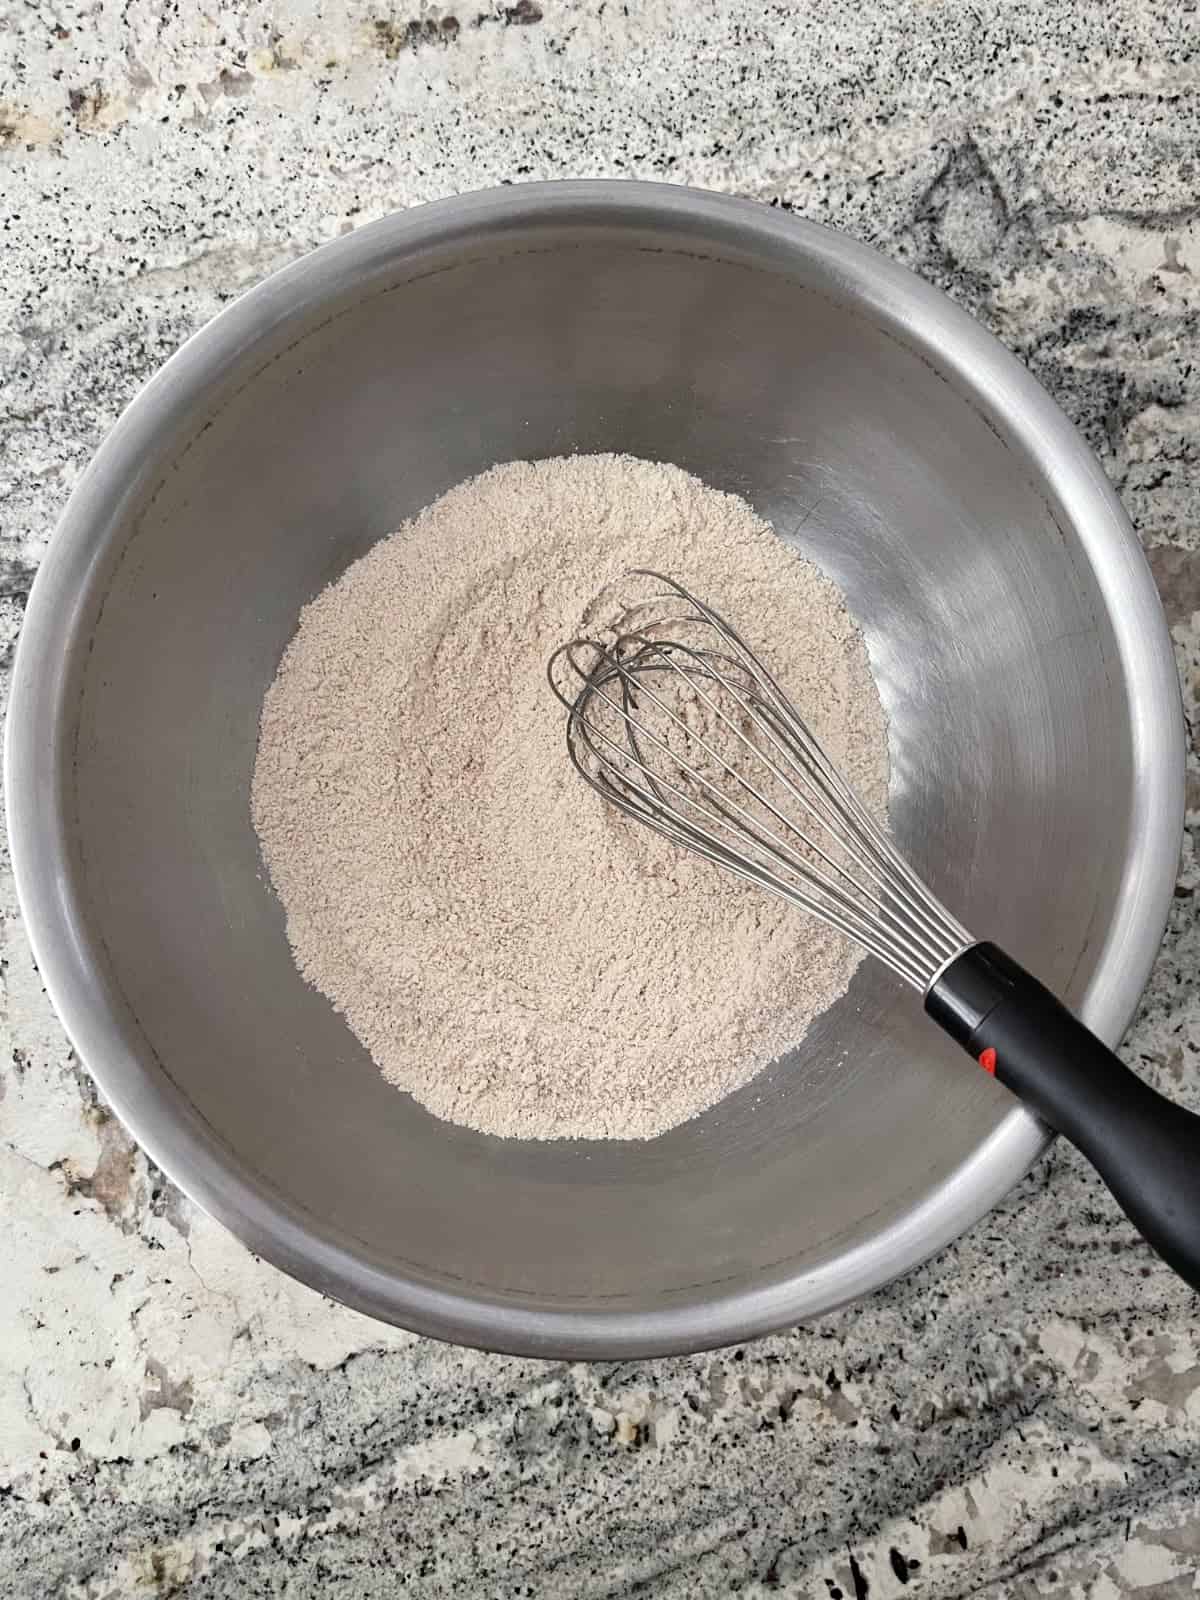 Whisking whole wheat pastry flour, salt, baking soda and cinnamon in mixing bowl.